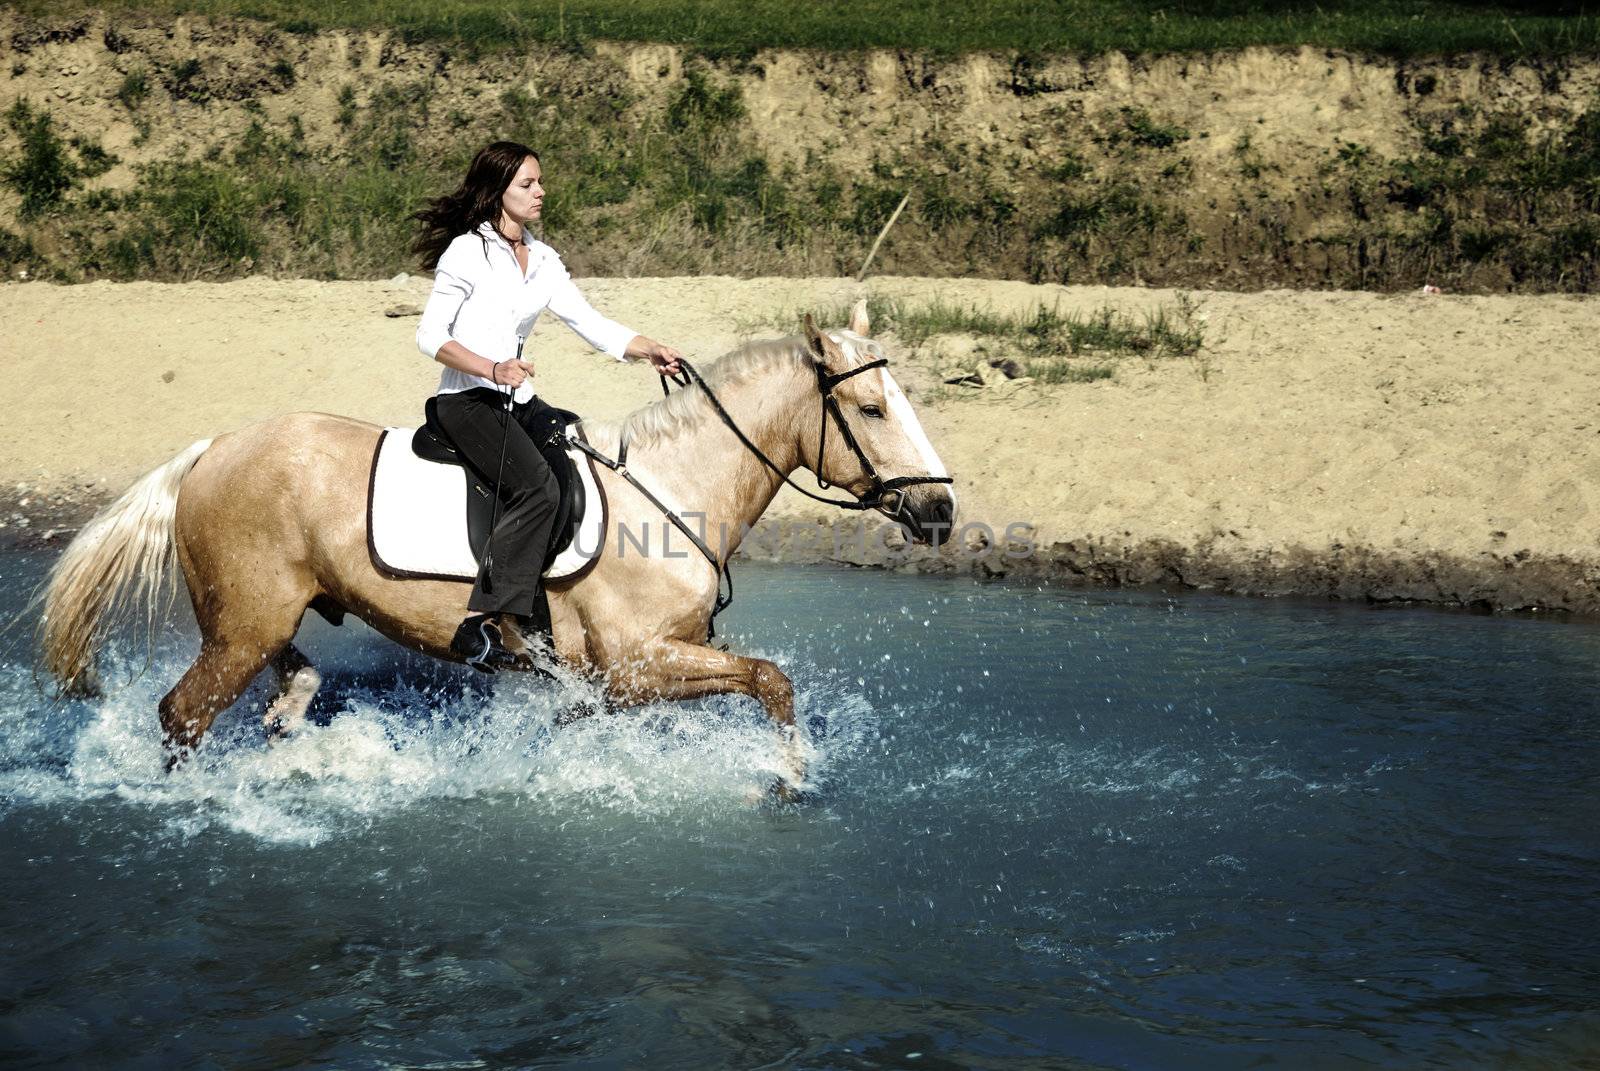 Photo of the woman riding on the horse through the river